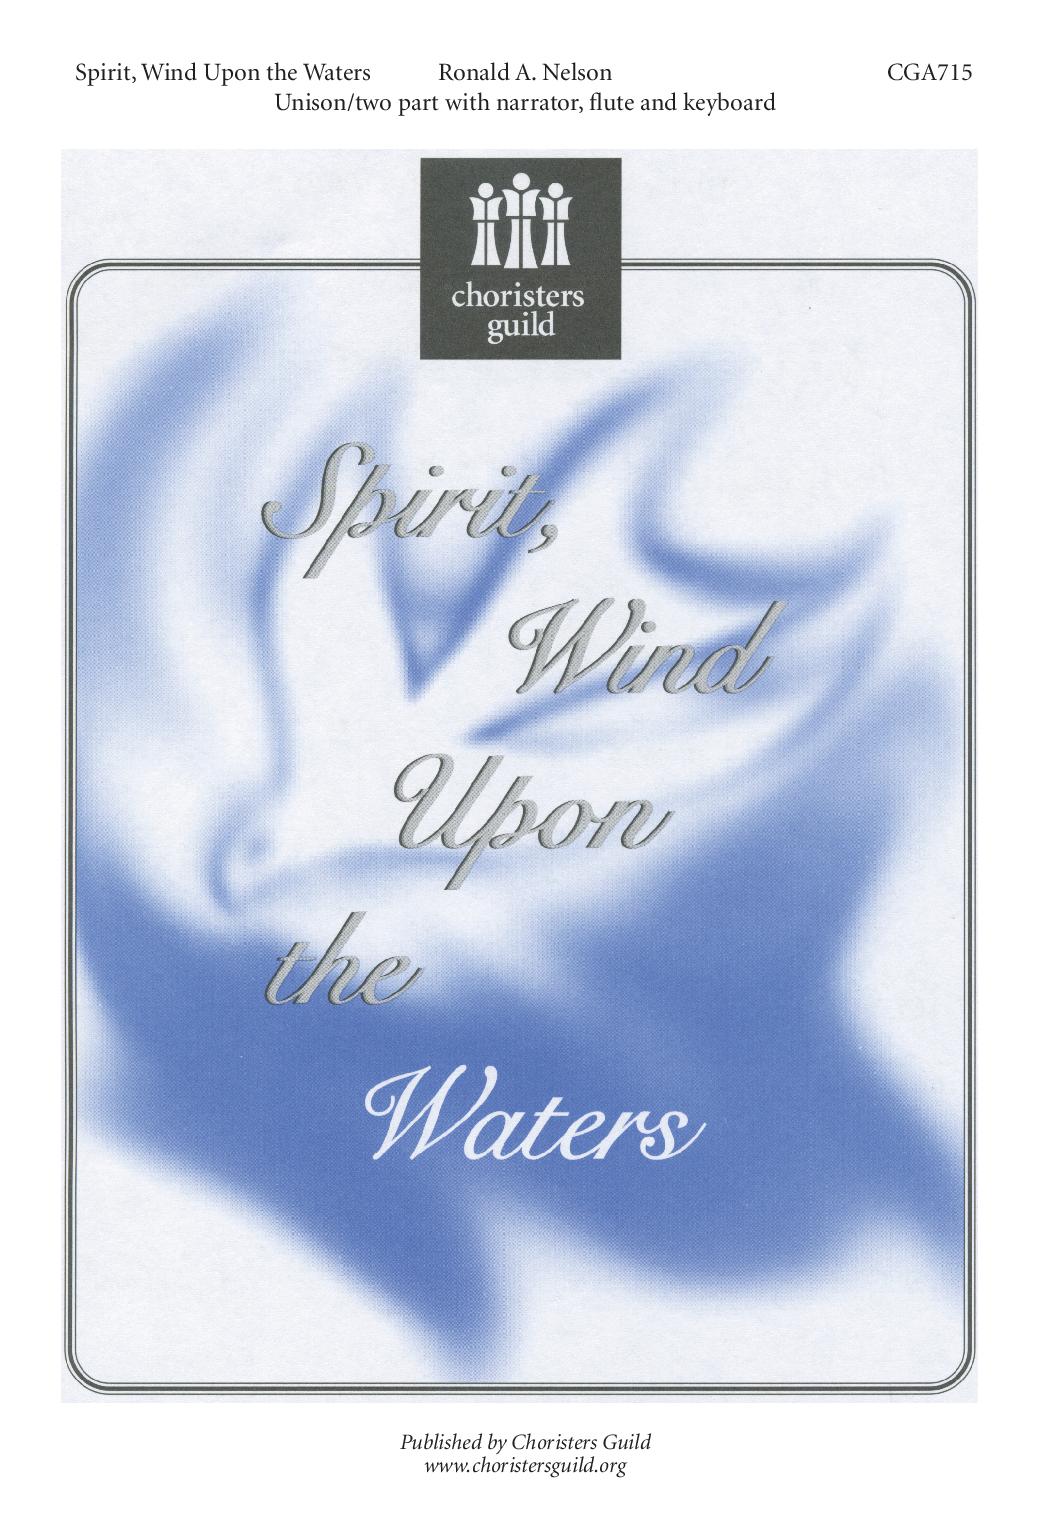 Spirit, Wind Upon the Waters